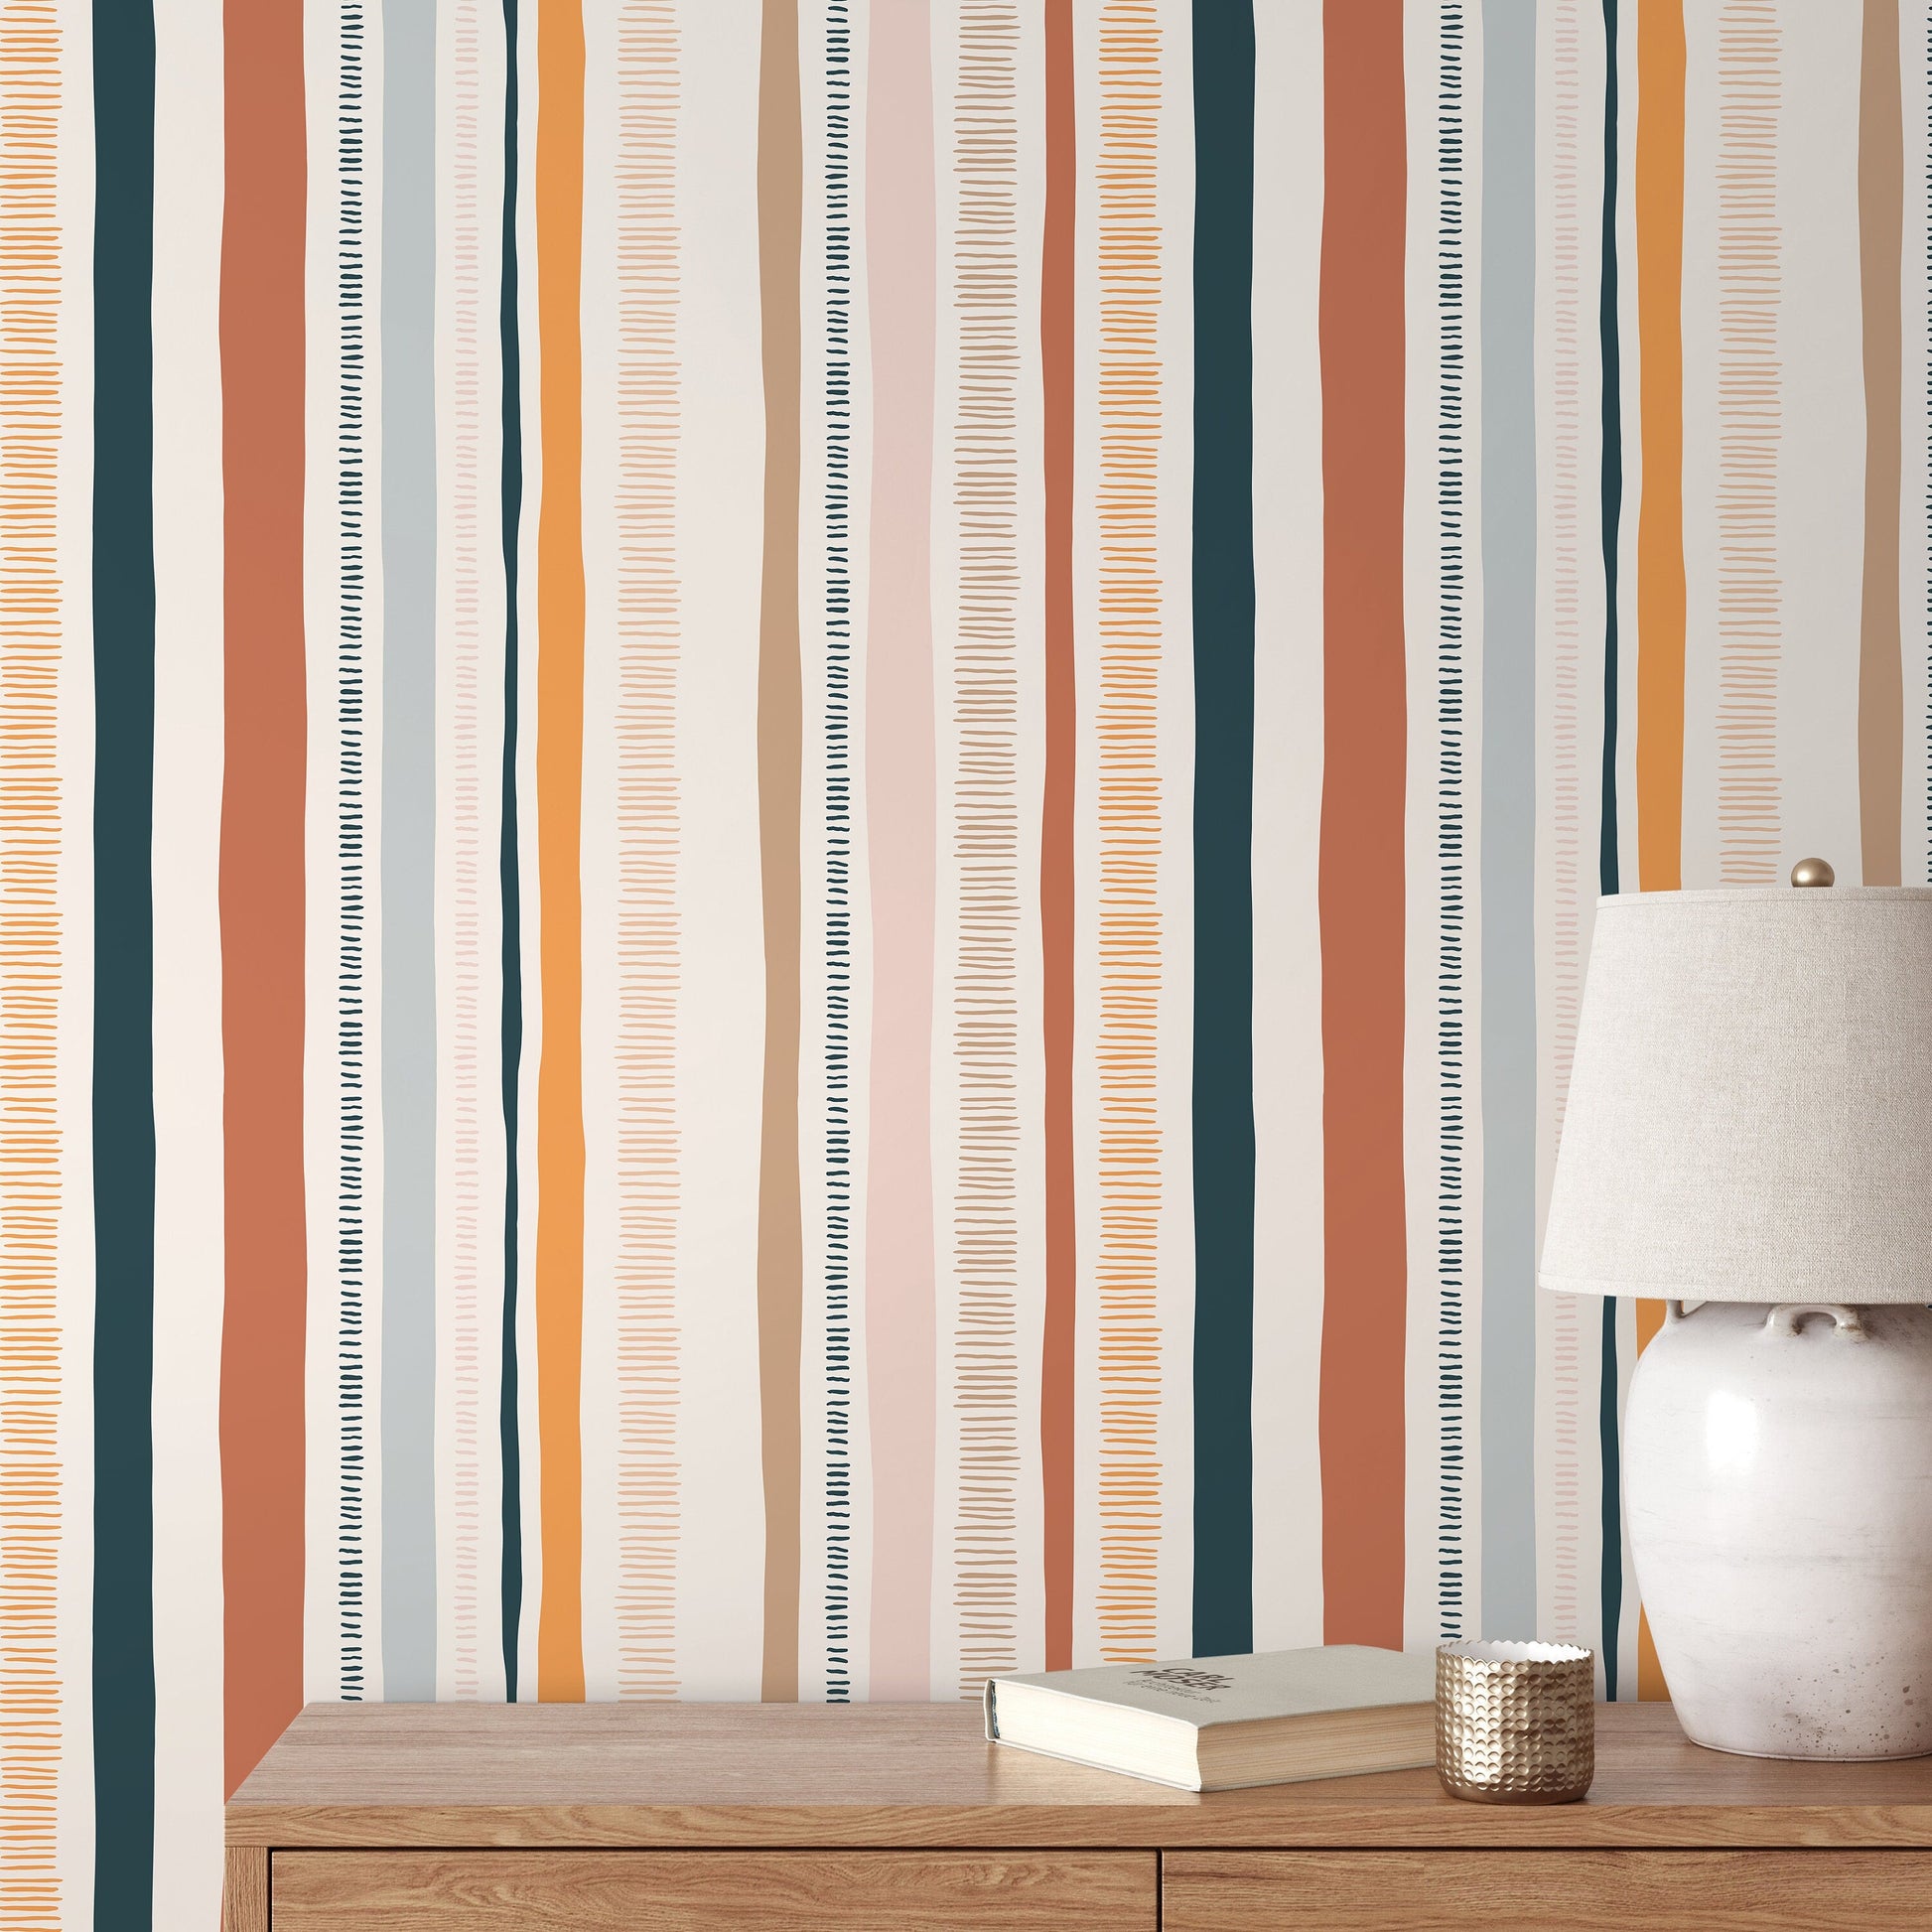 Colorful Striped Wallpaper Abstract Wallpaper Peel and Stick and Traditional Wallpaper - D809